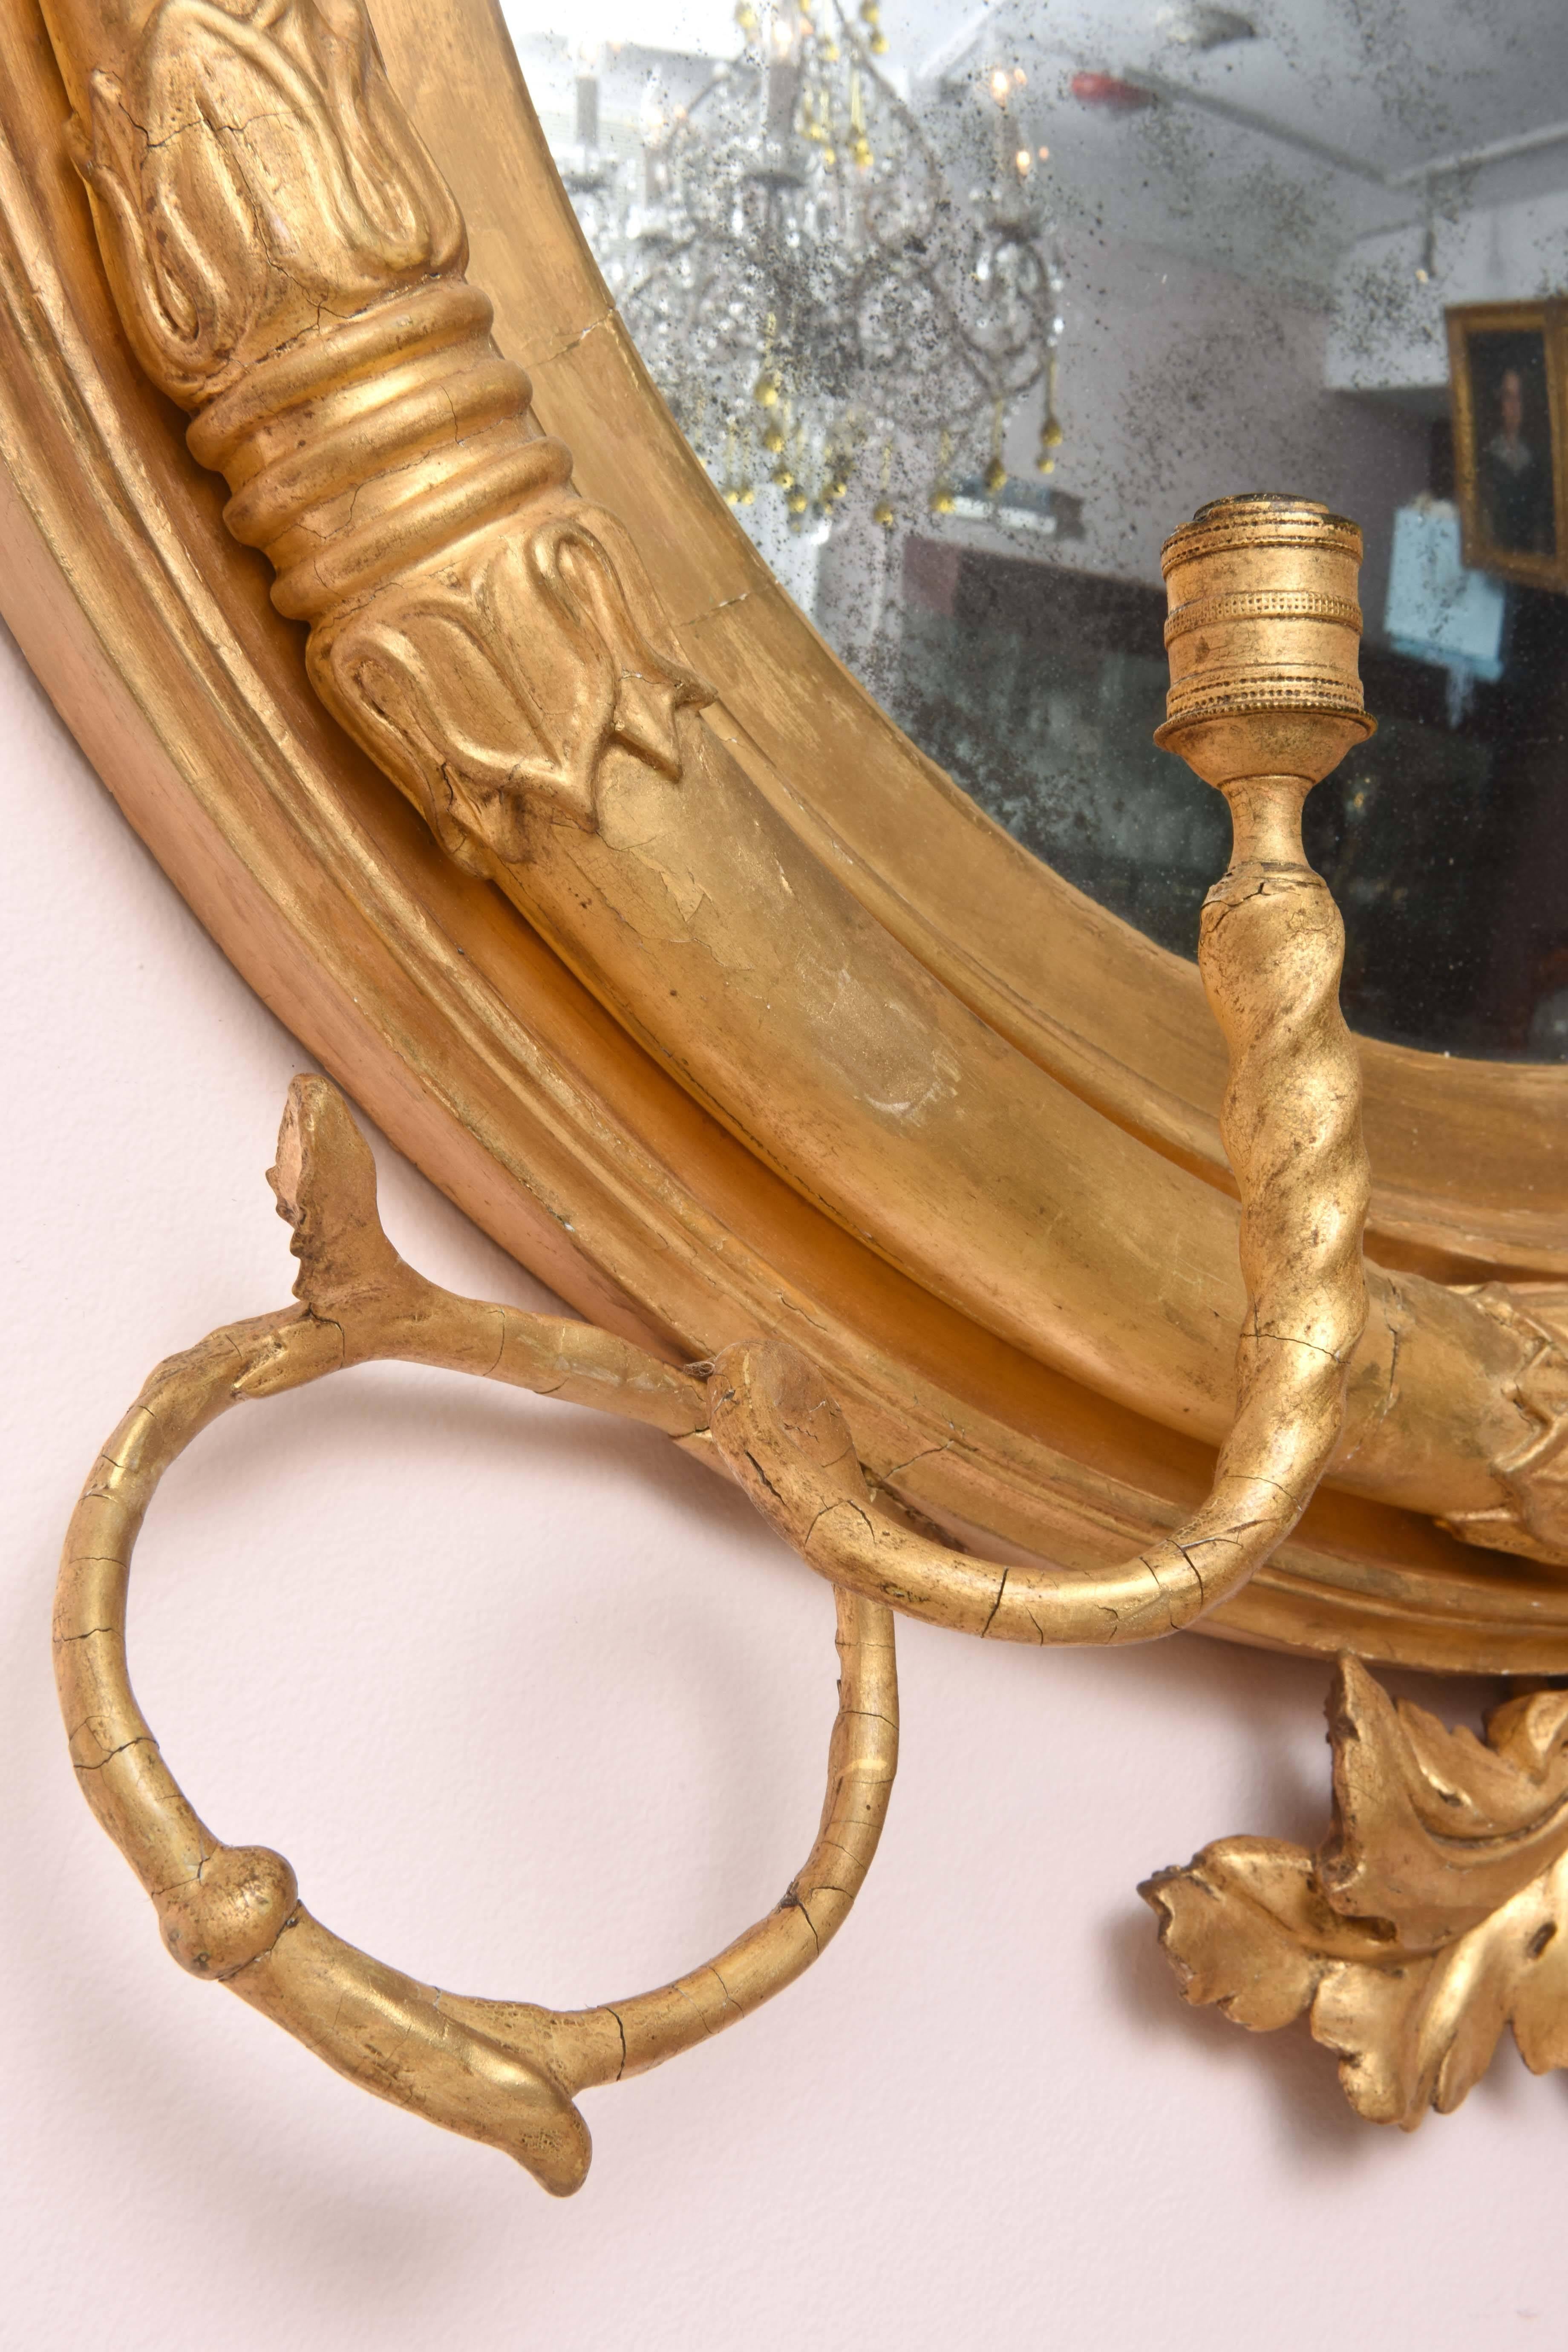 19th Century Authentic Antique Regency Period Mirror, Carved Wood, Heavily Gilded, circa 1820